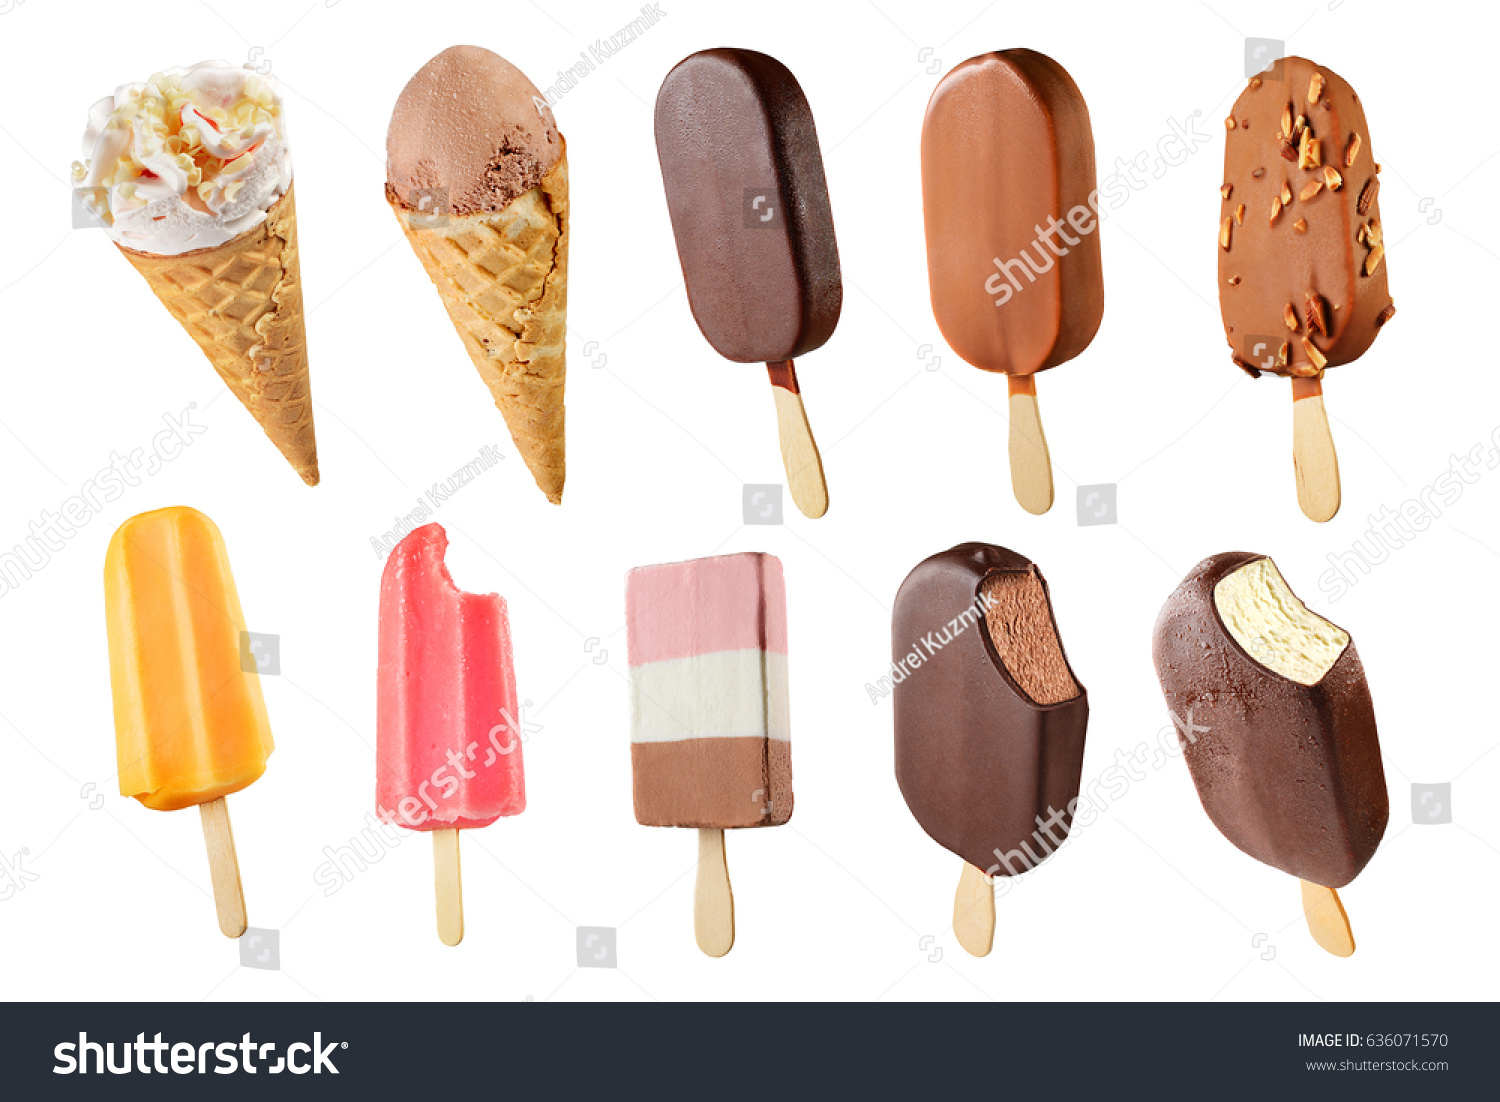 Set of diffrent ice creams isolated on white background #636071570